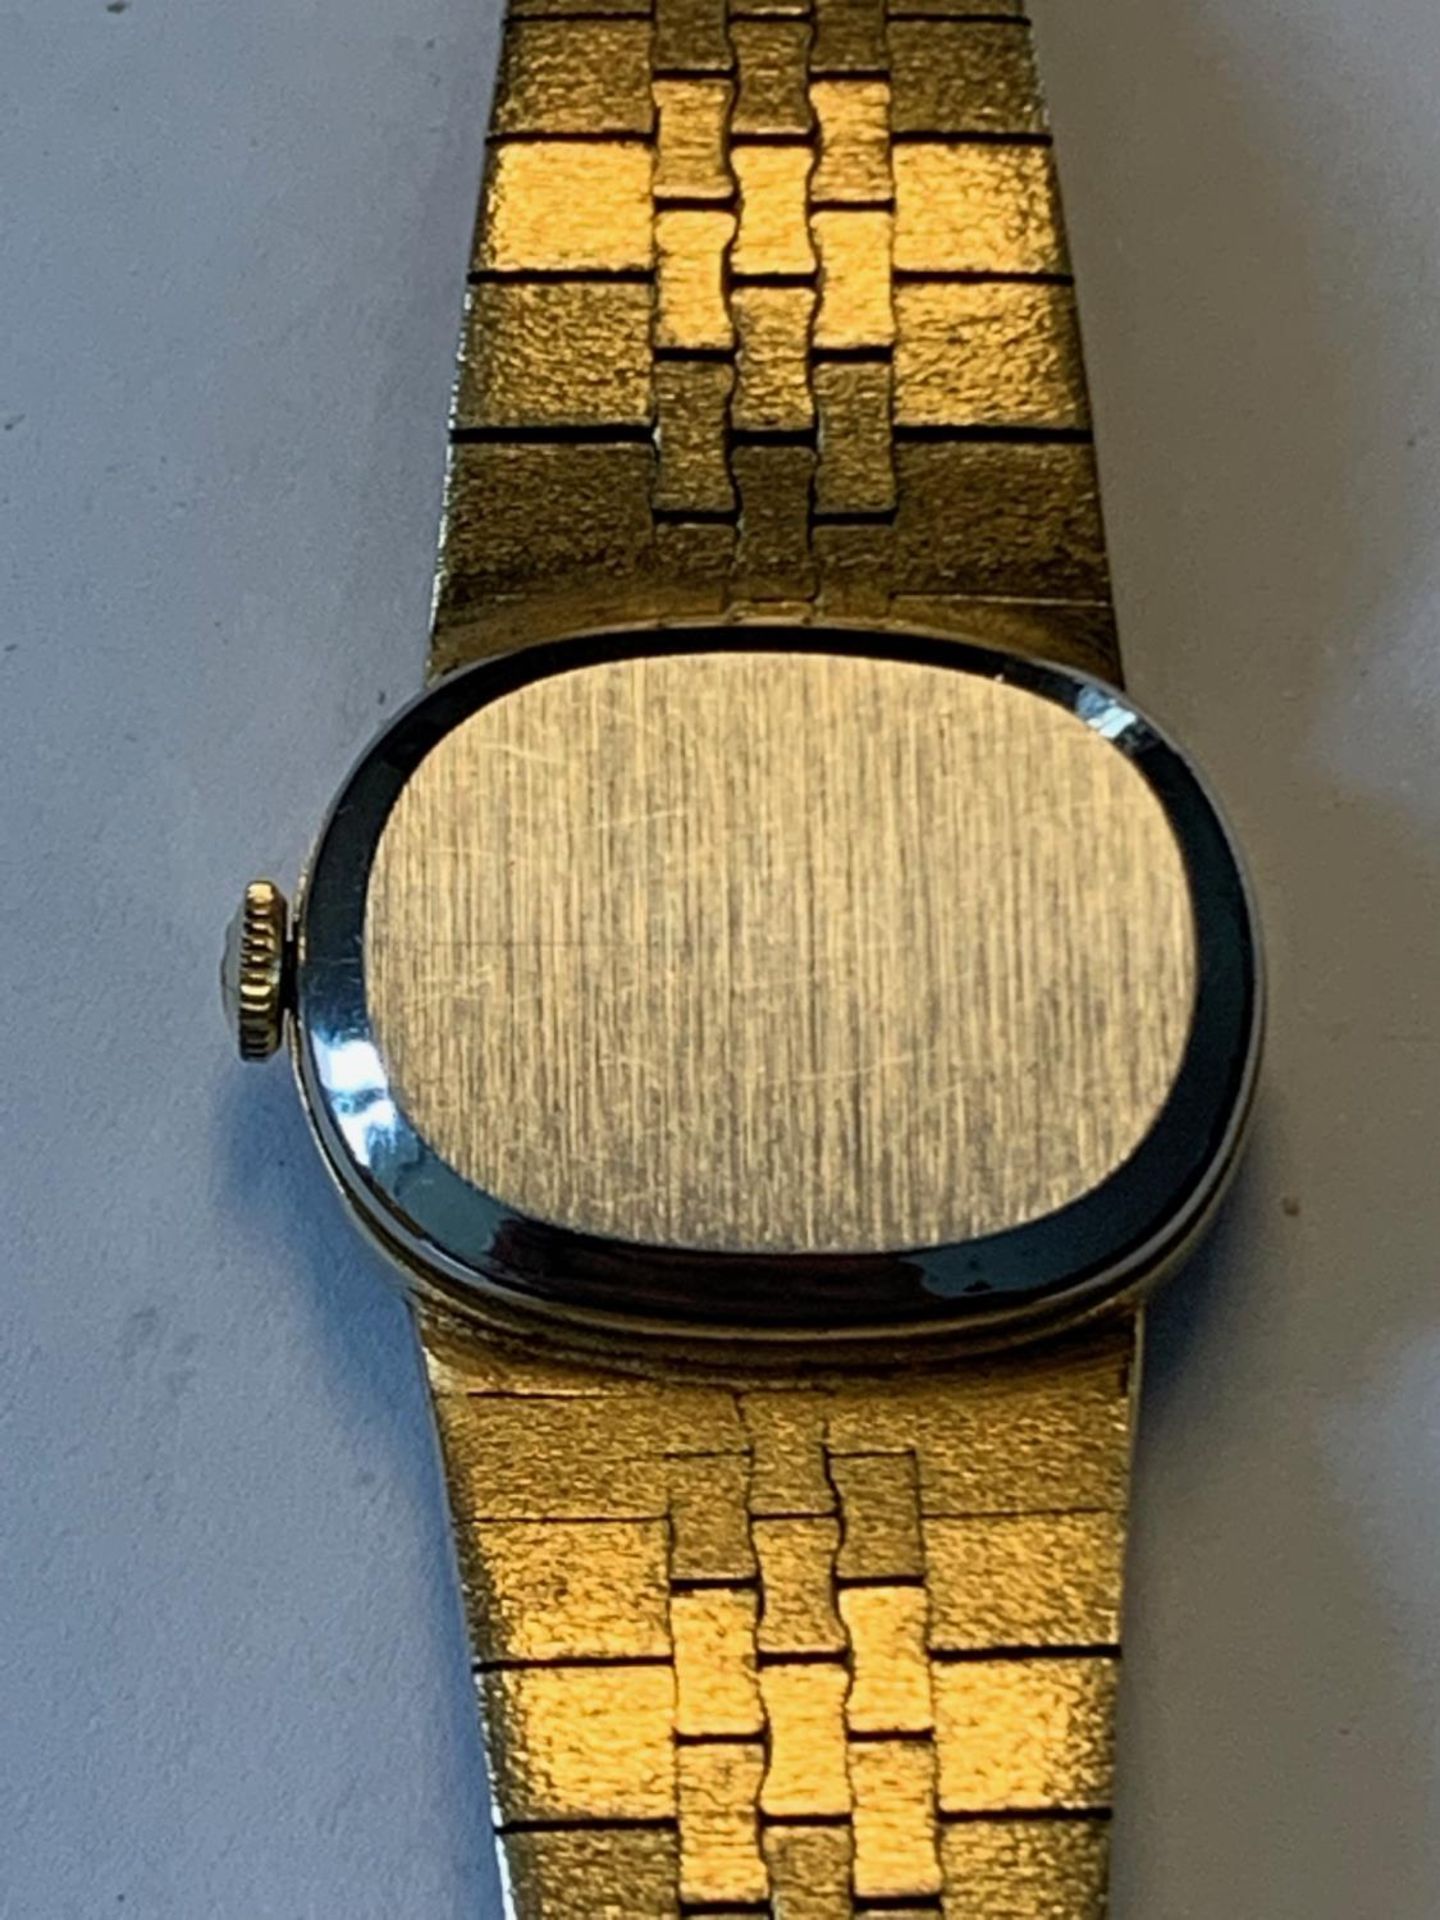 A TISSOT WRISTWATCH WITH YELLOW METAL STRAP - Image 3 of 3